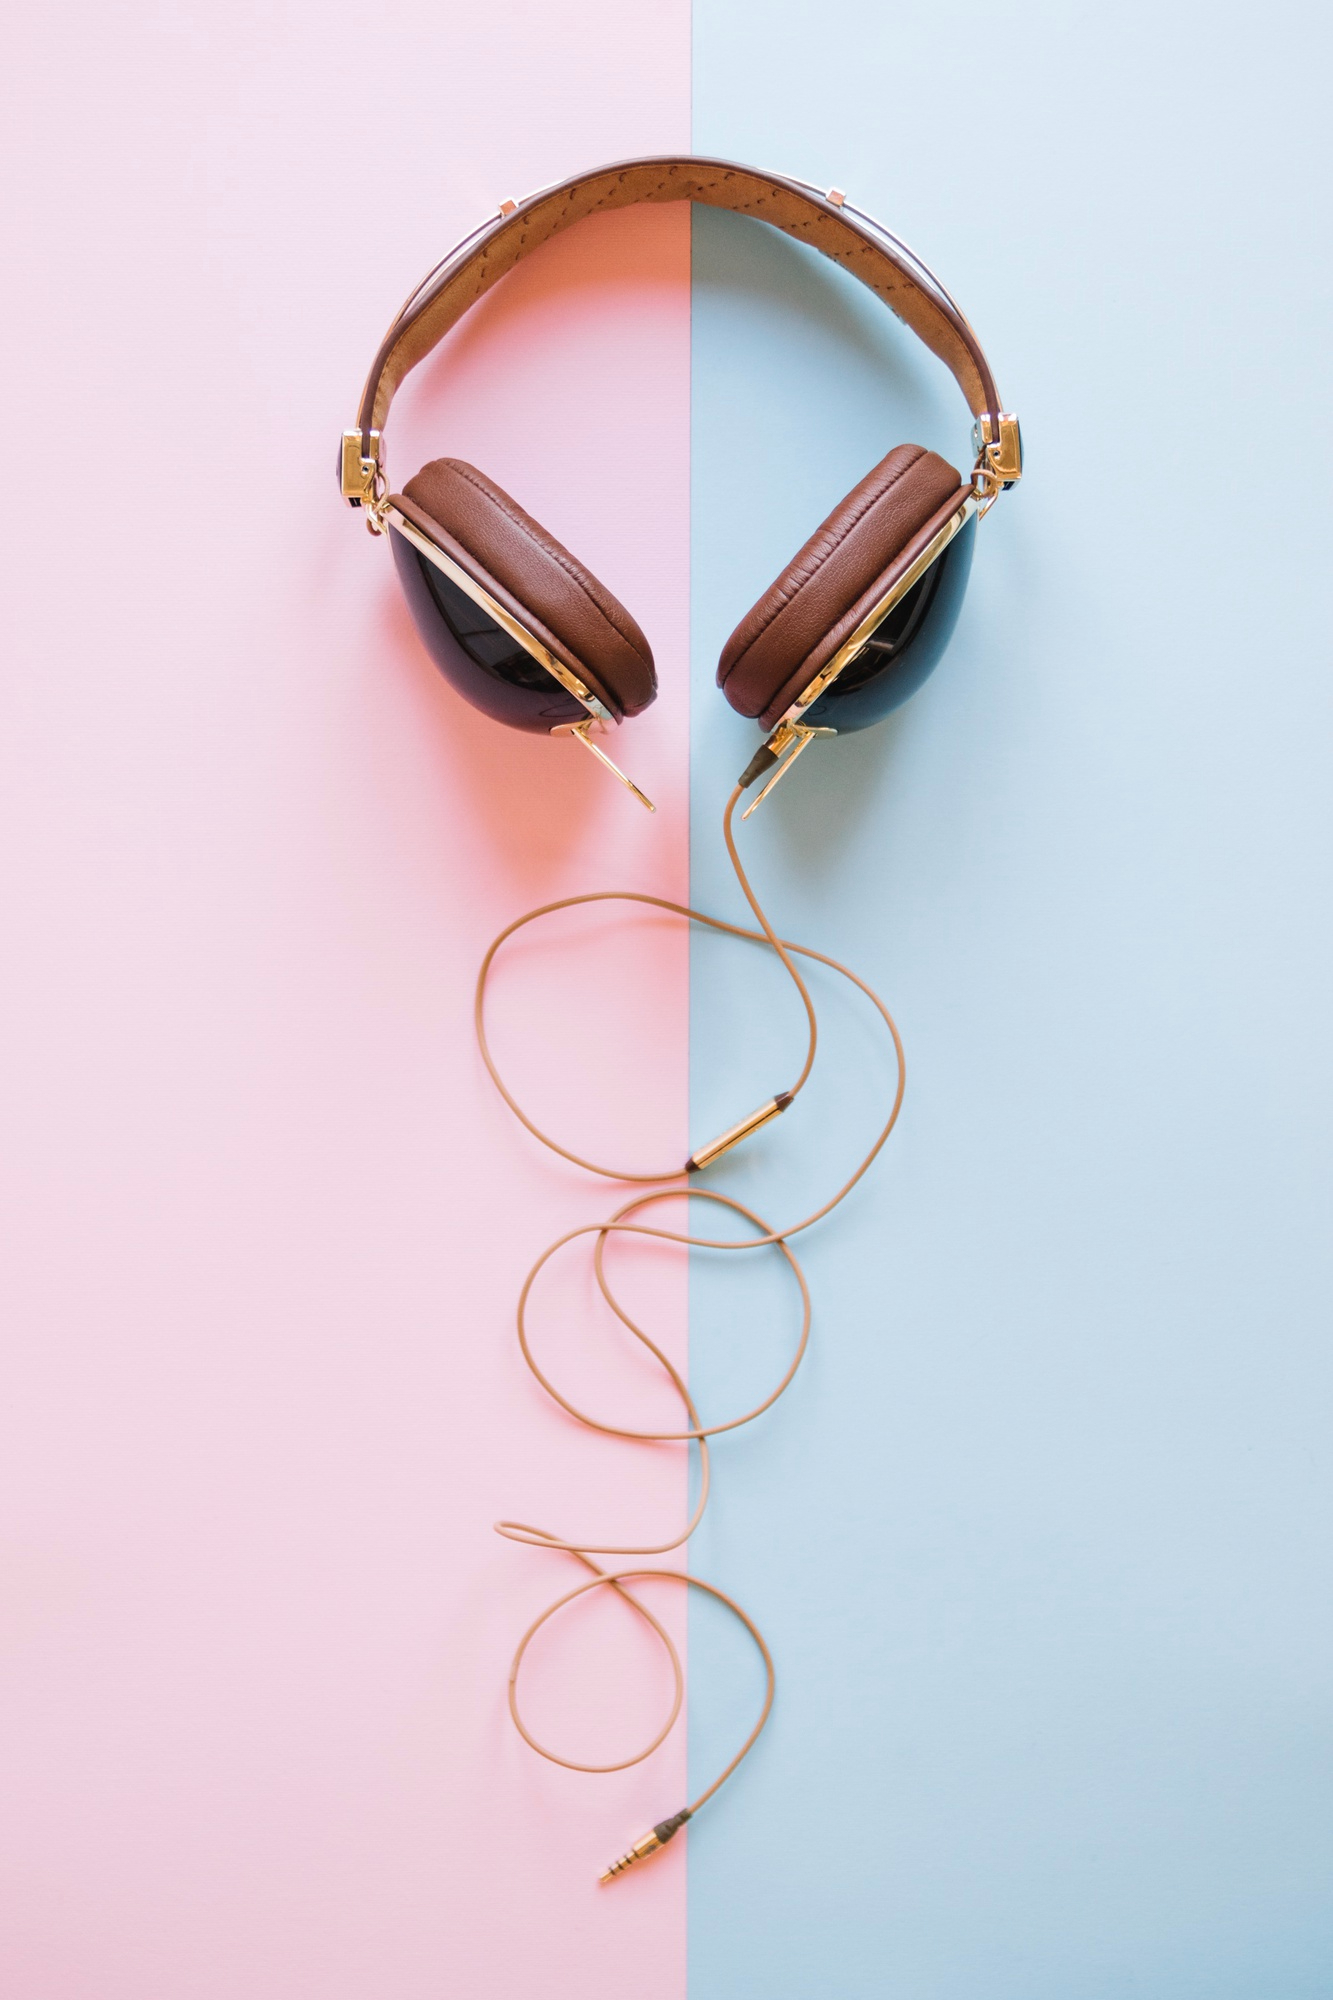 Headphones on a pink and blue background | Source: Freepik